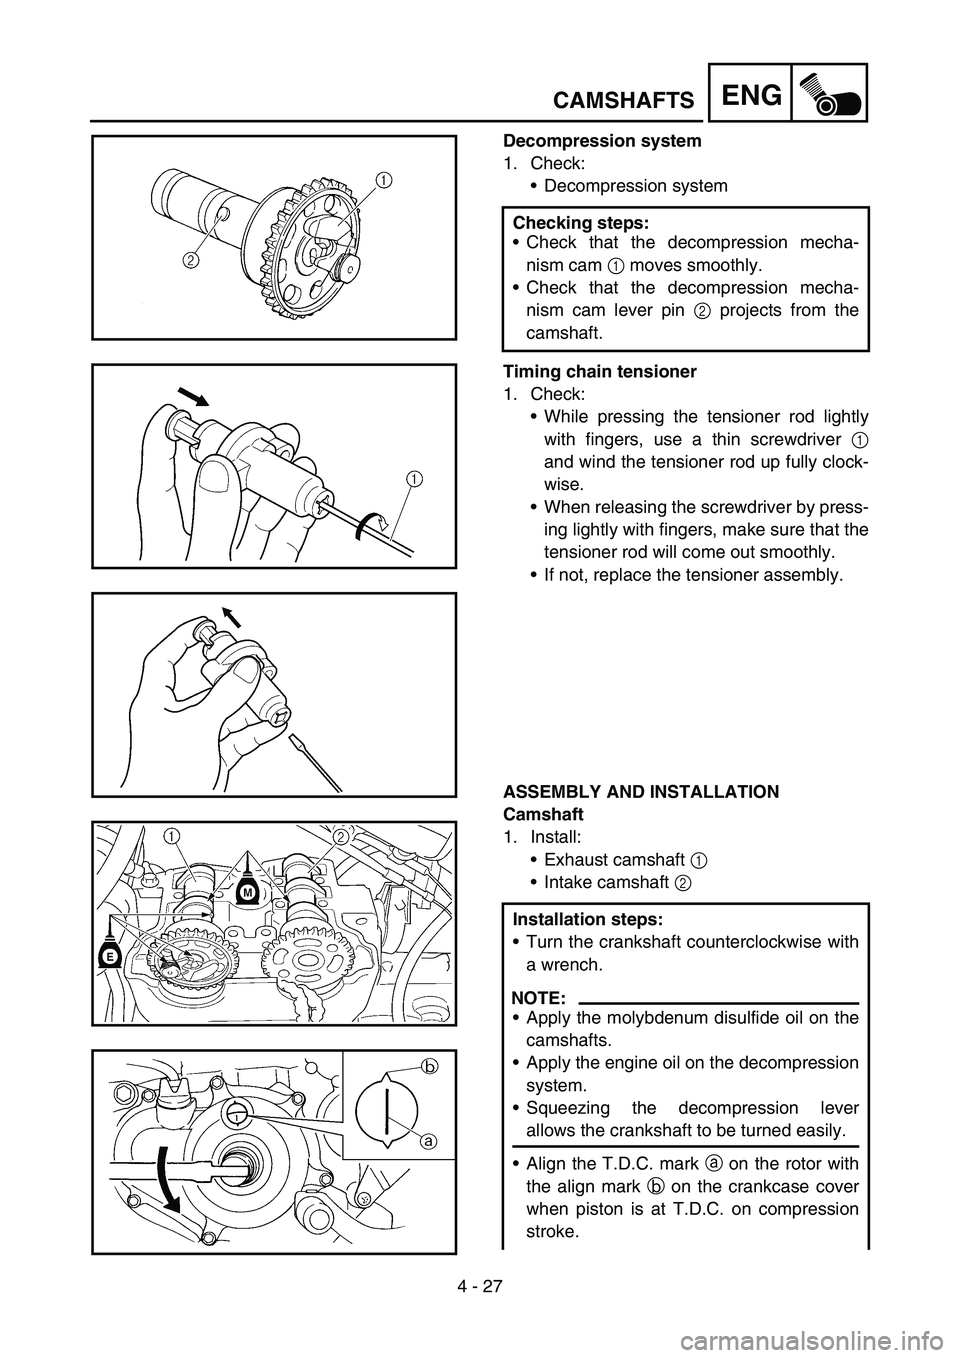 YAMAHA YZ250F 2006  Owners Manual 4 - 27
ENGCAMSHAFTS
Decompression system
1. Check:
Decompression system
Timing chain tensioner
1. Check:
While pressing the tensioner rod lightly
with fingers, use a thin screwdriver 1
and wind the 